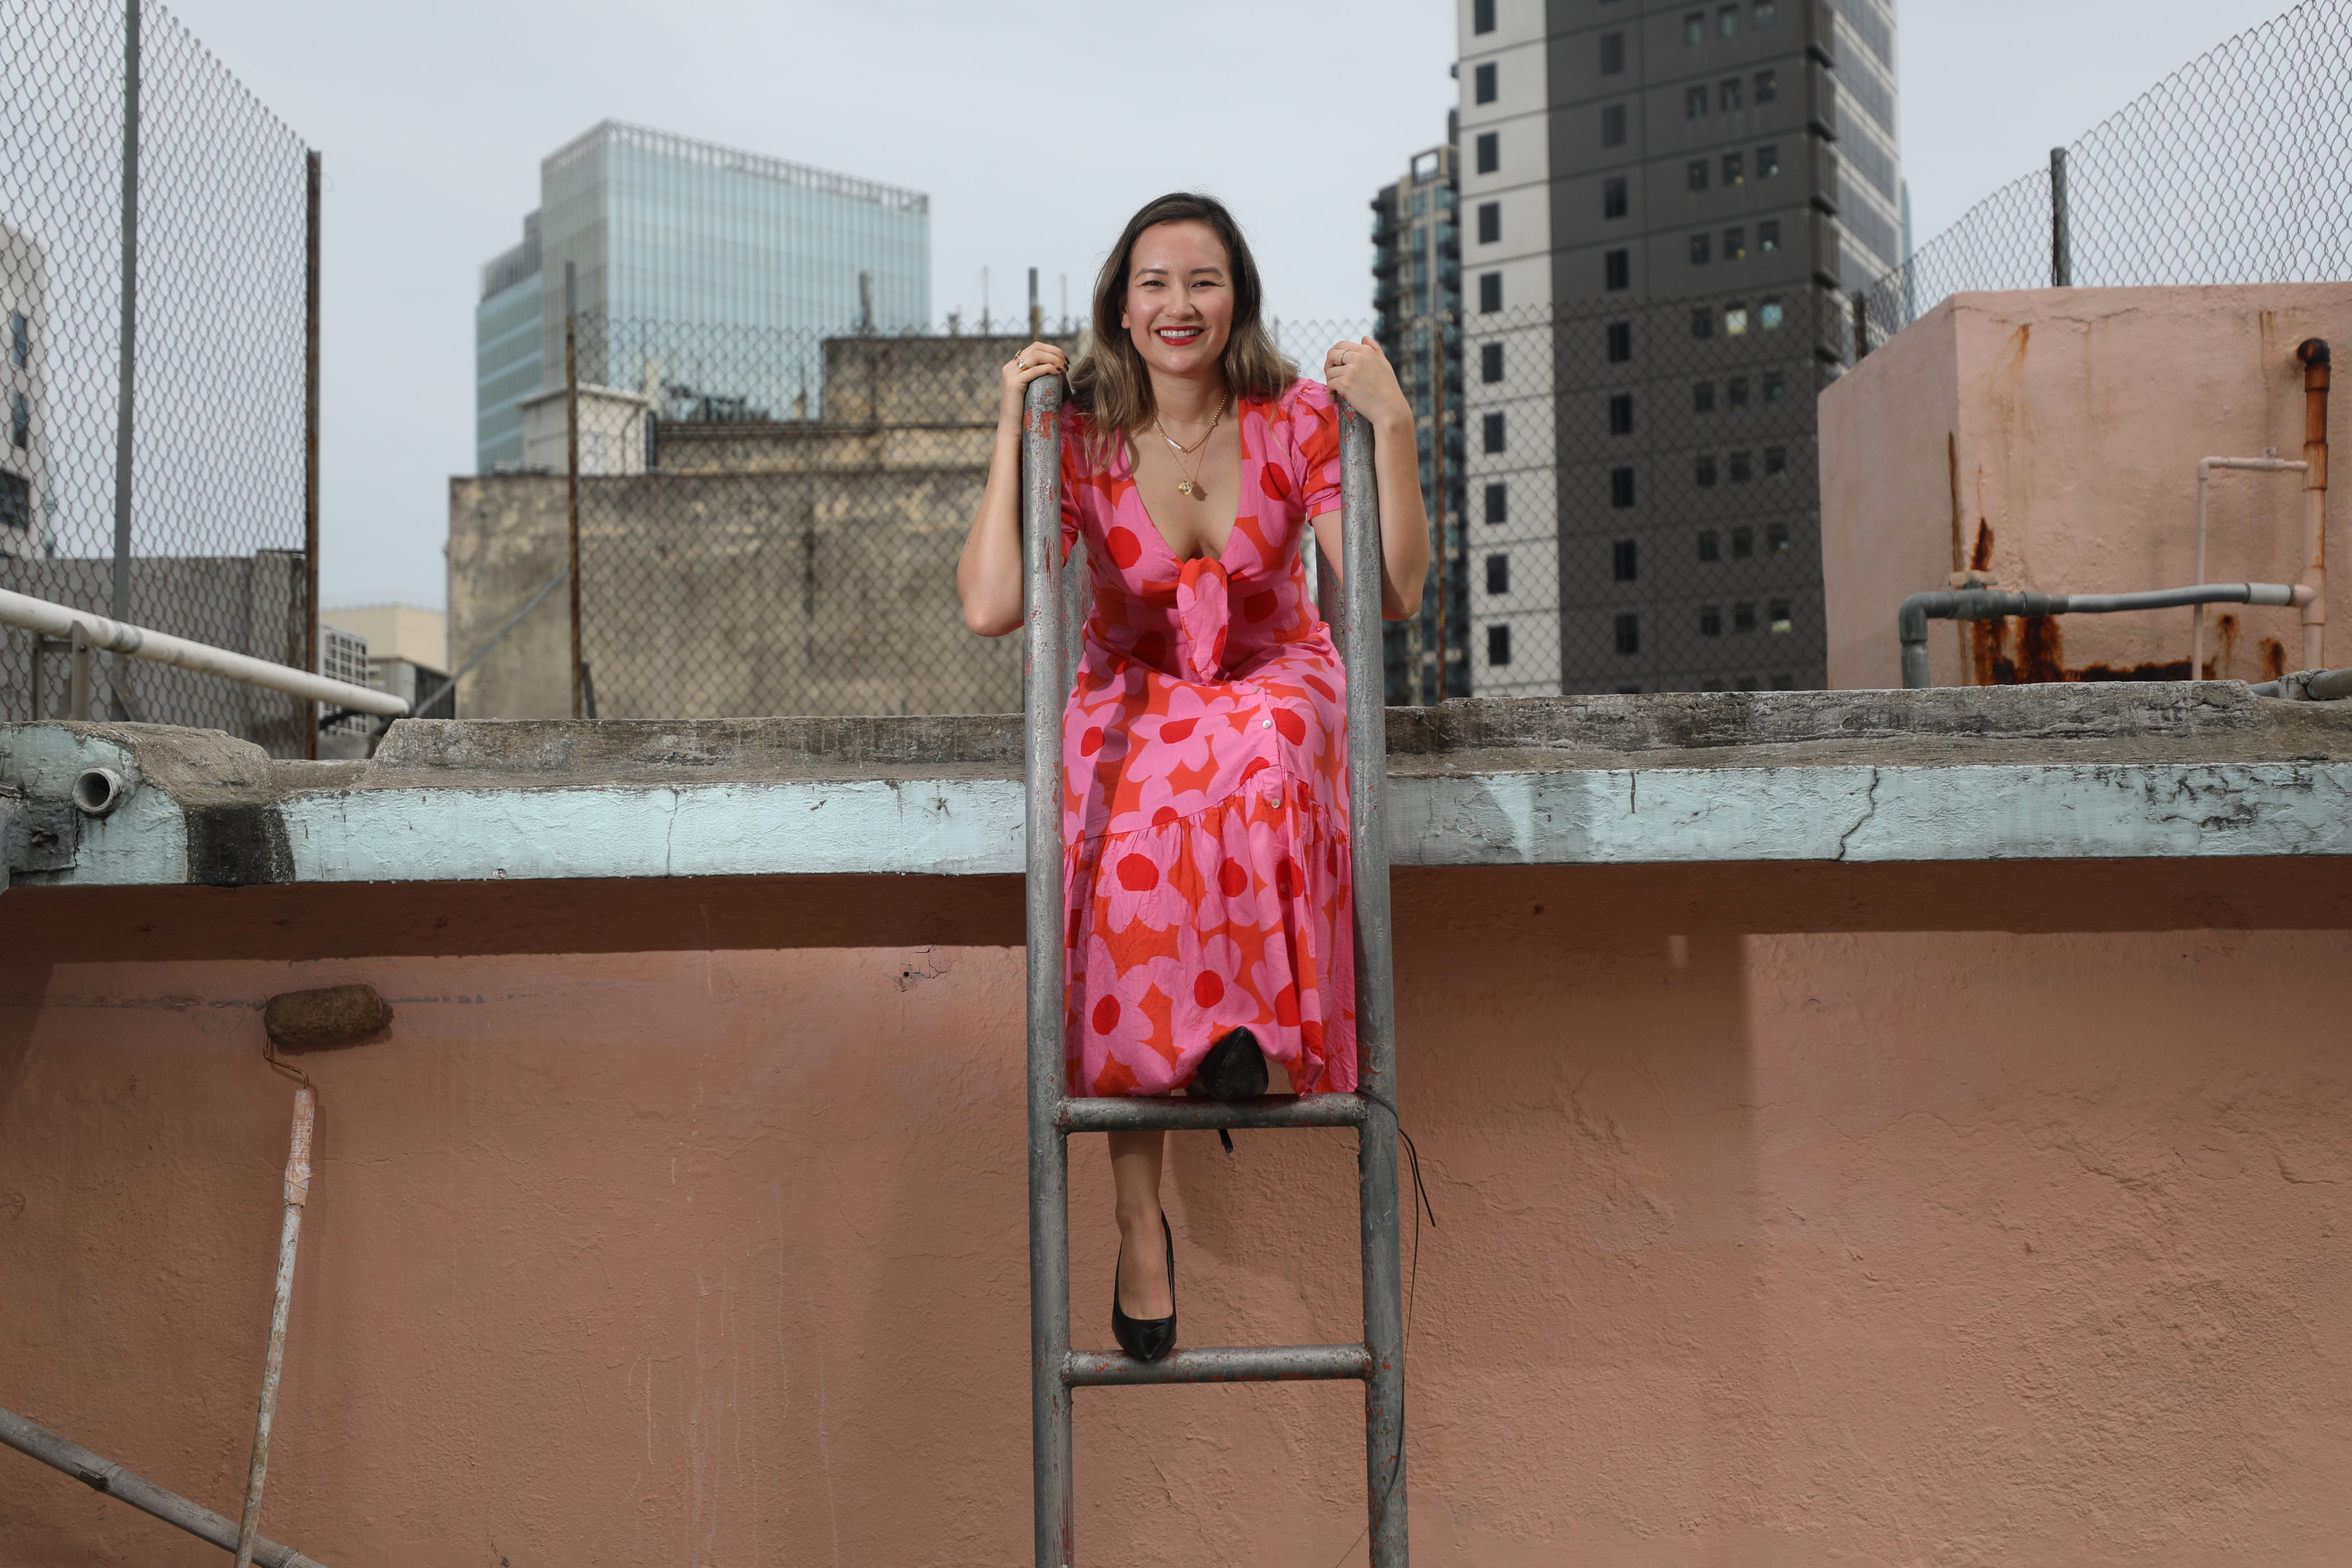 Belinda Esterhammer in Quarry Bay where The DO, of which she is Asia chief executive, has its offices. Having reached the top, she has a passion for helping other women and girls climb the ladder and achieve equity. Photo: Xiaomei Chen